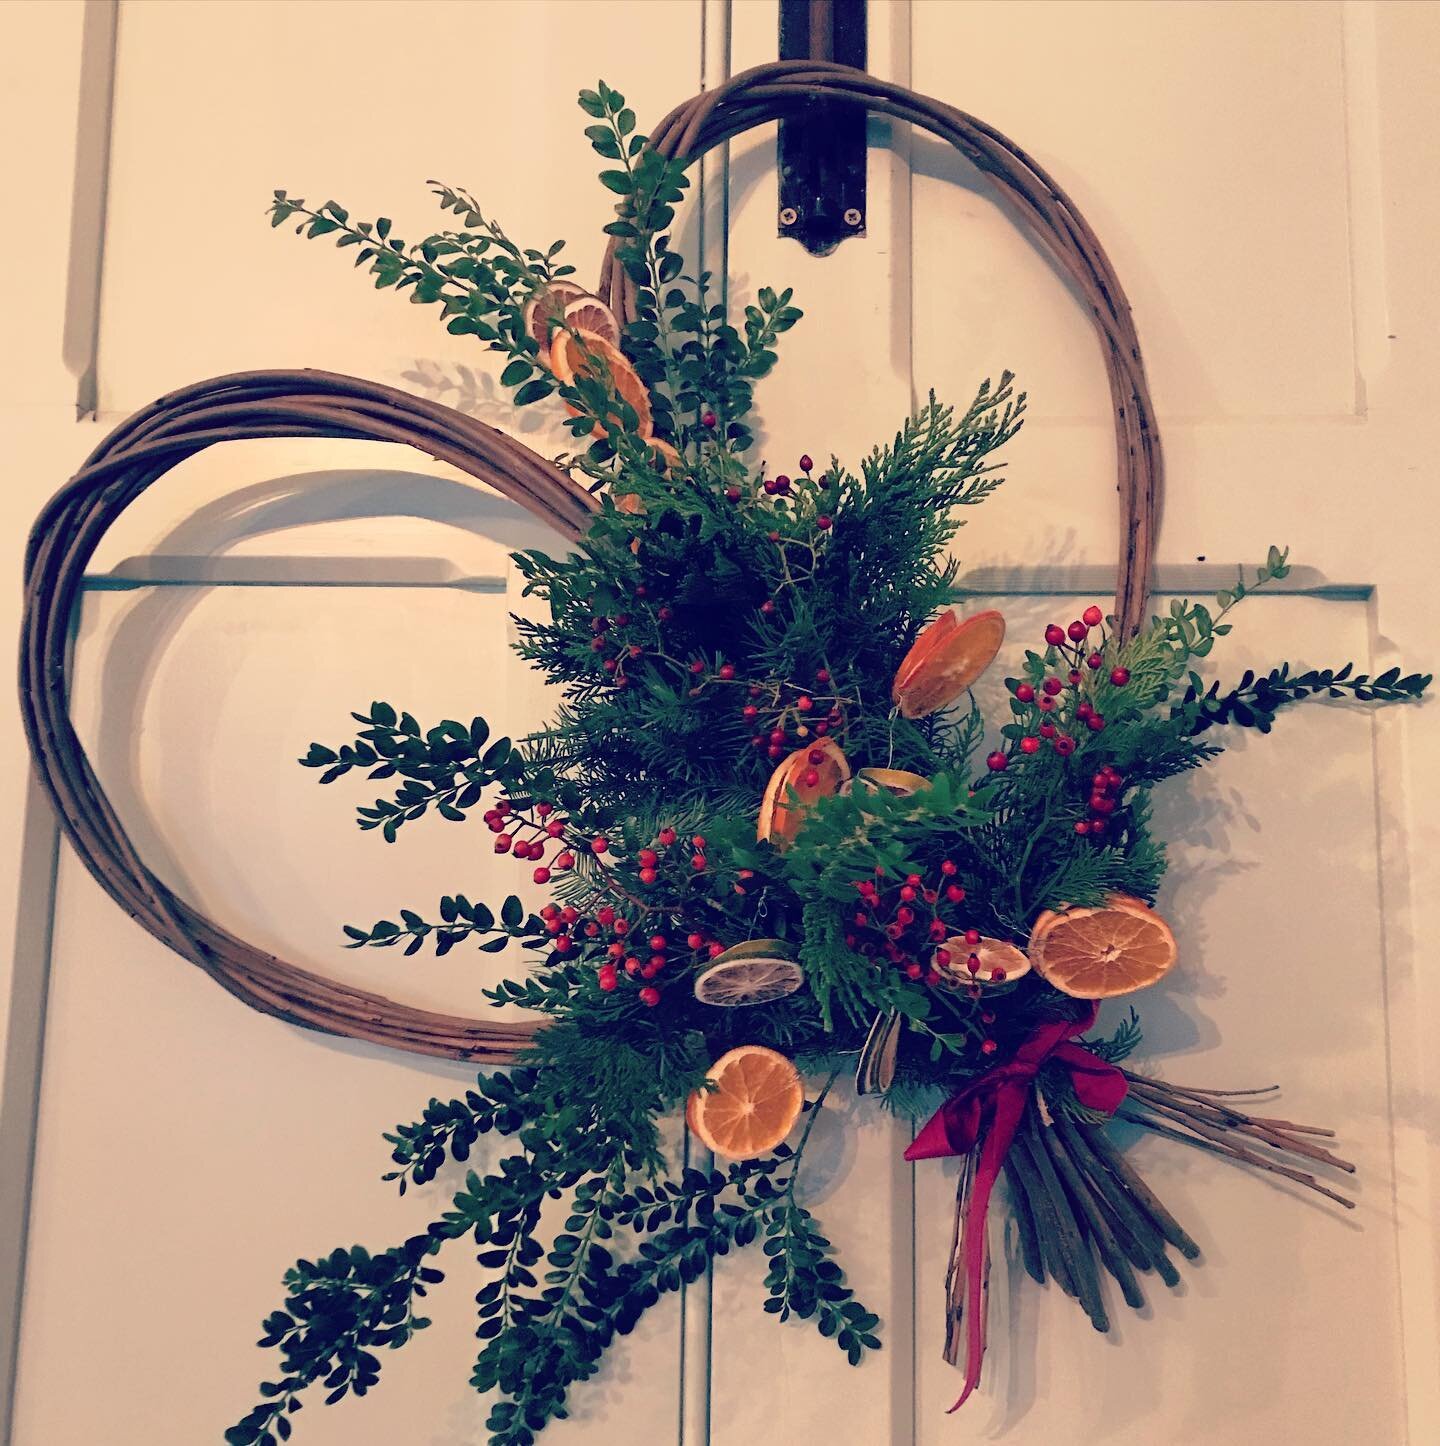 Can&rsquo;t wait for the Christmas market on Sunday!
Village hall in Braemar for fresh door Christmas wreaths&hellip; a few extra lovely hearts made by @deesidewillow too. Search for festival de Noel @stmargaretsbraemar for all the amazing shops and 